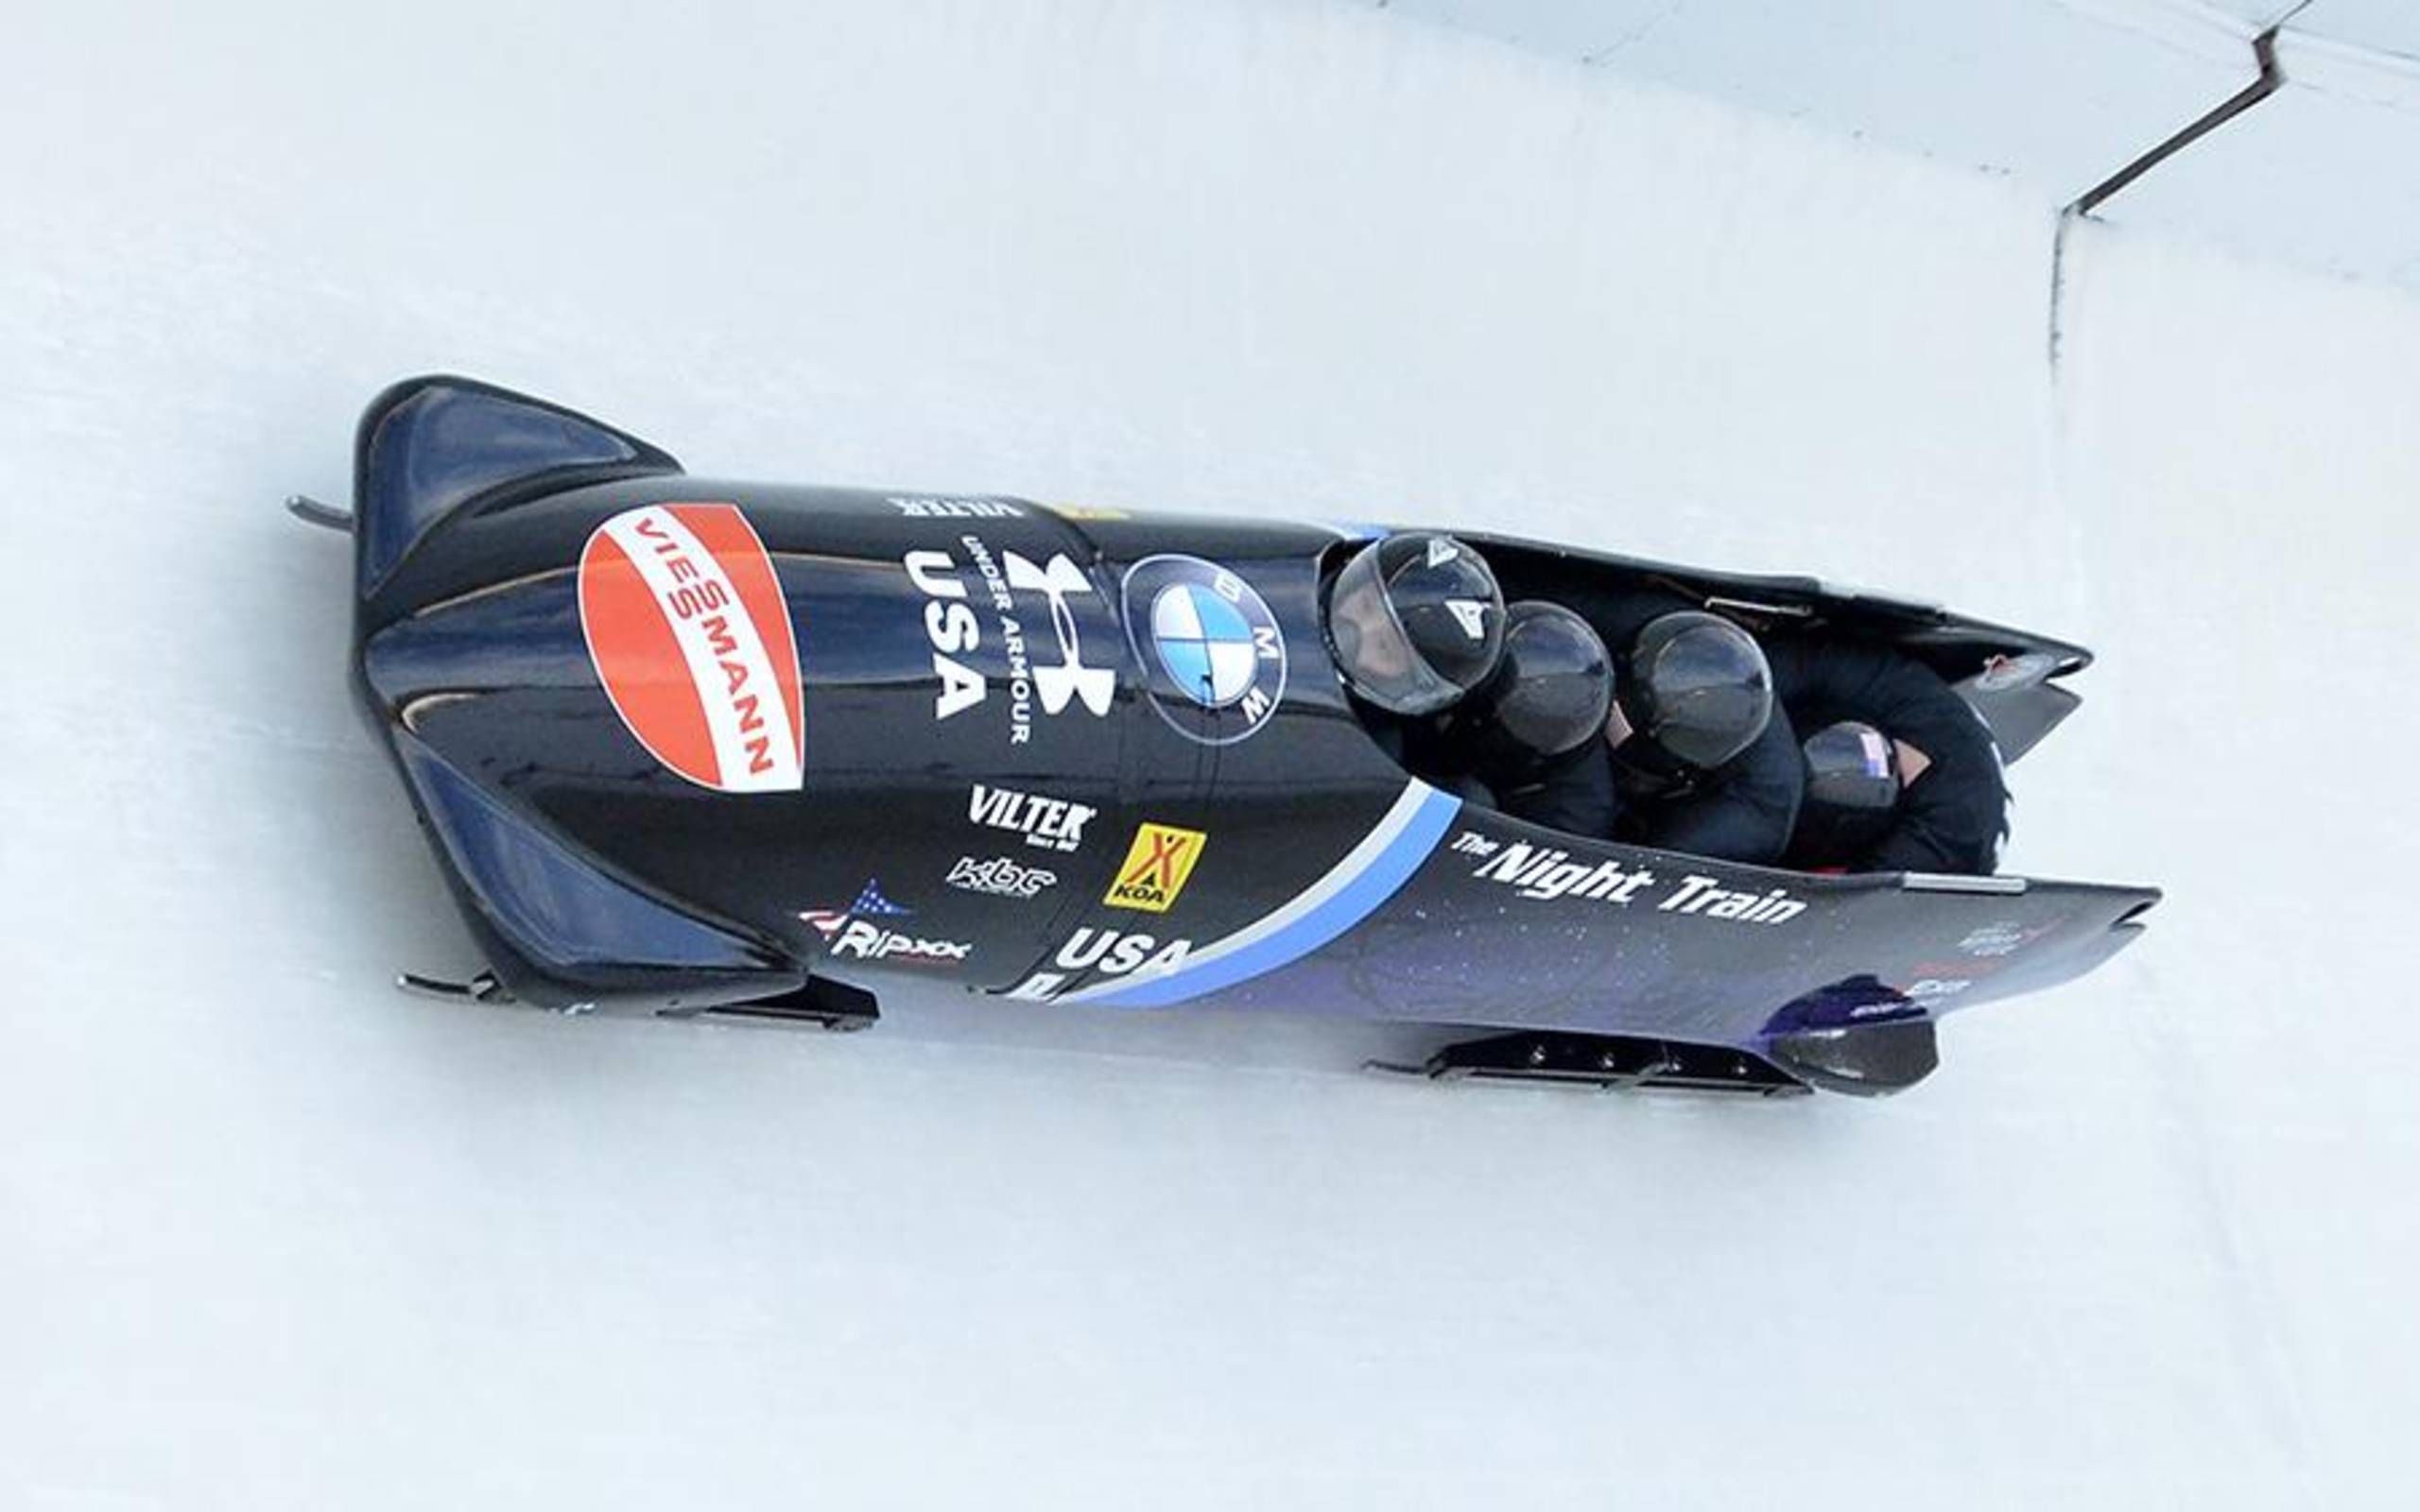 BMW bobsled carries Team USA to Winter Olympics victory